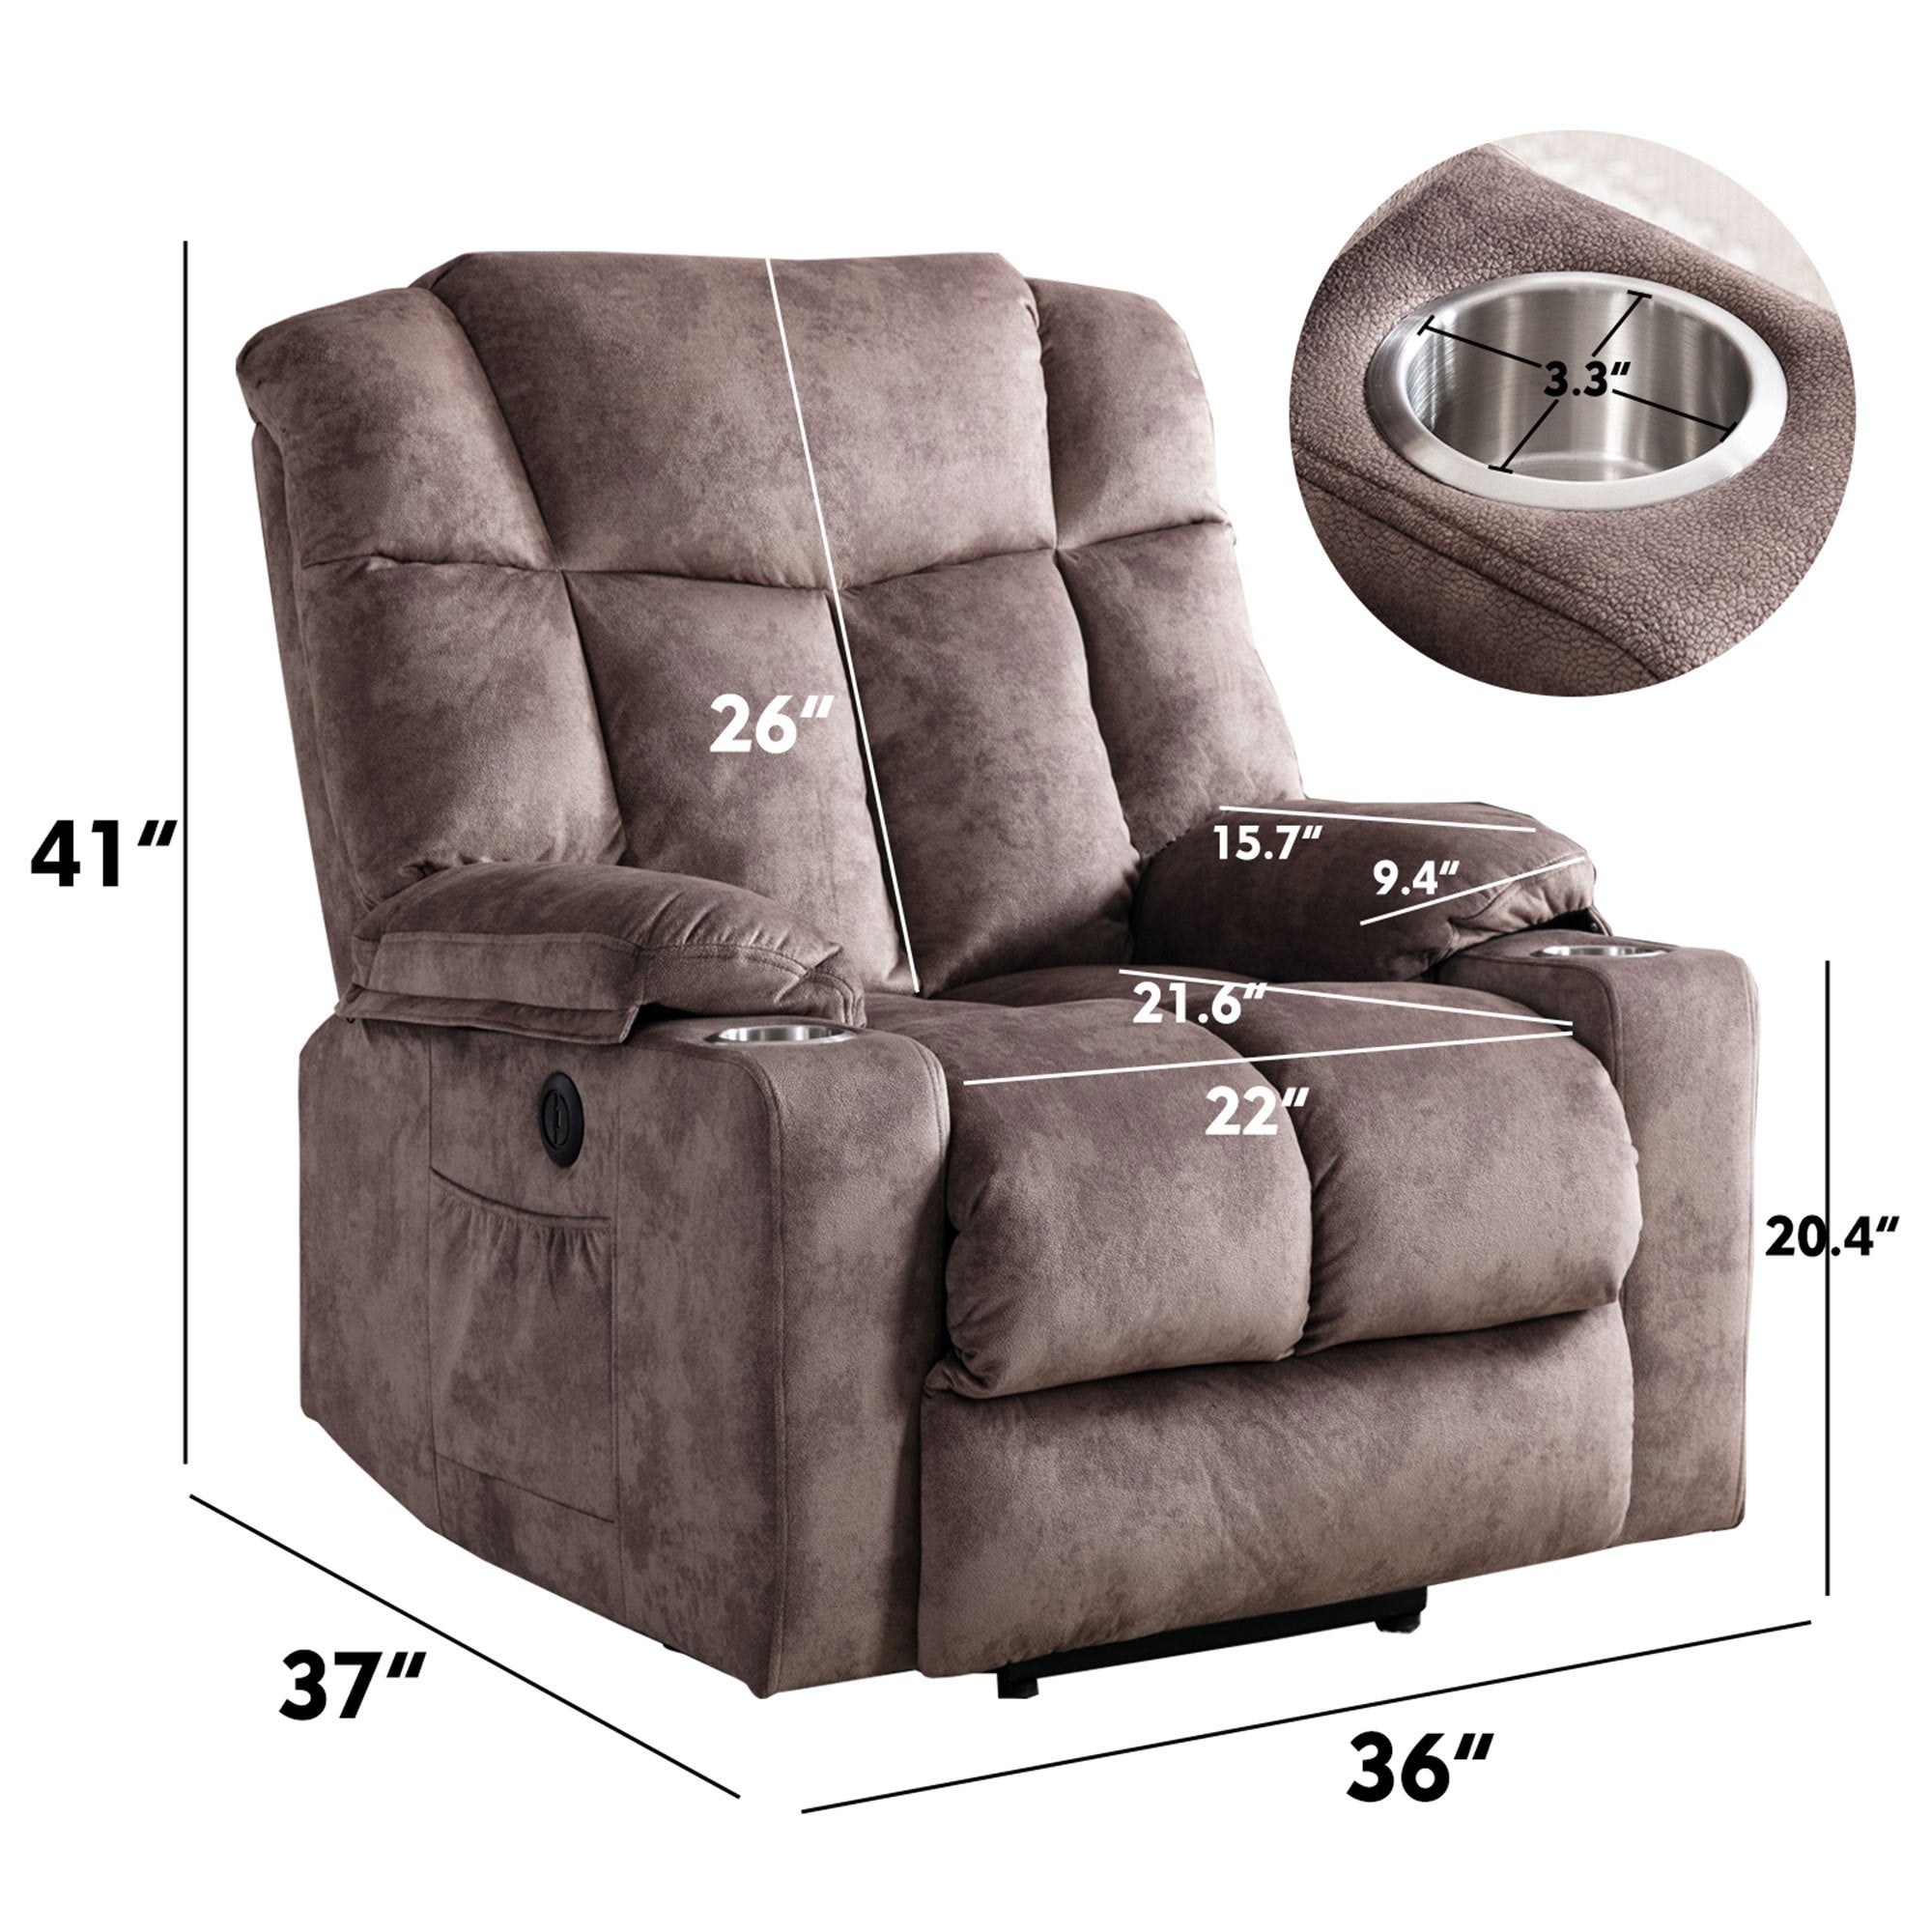 Power Lift Recliner Chair with Washable Cover, dimensions